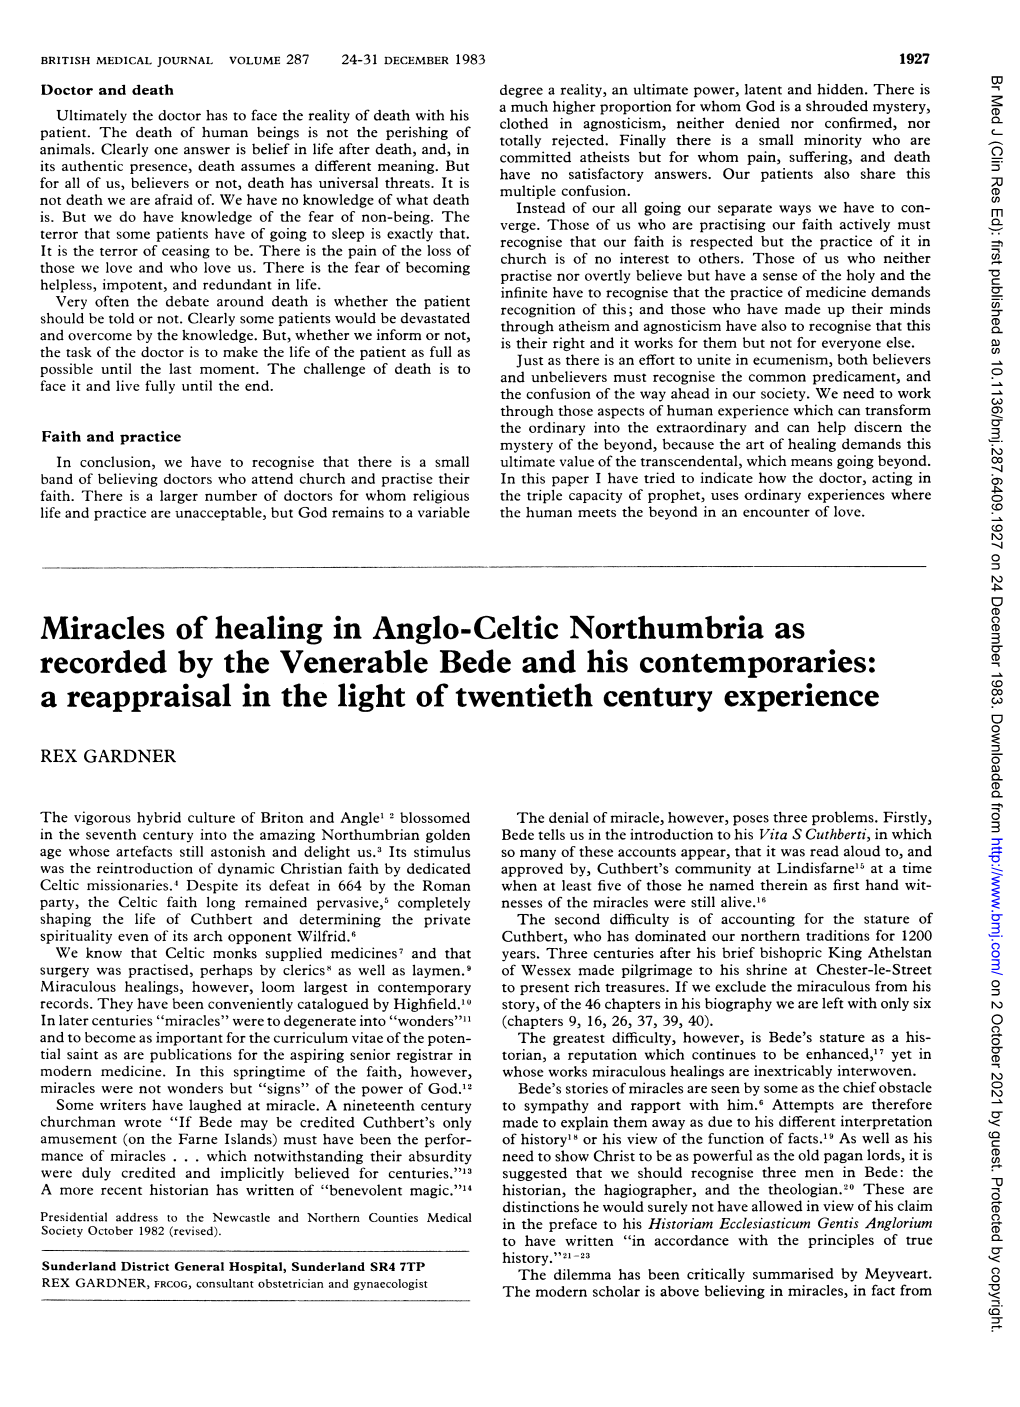 Miracles of Healing in Anglo-Celtic Northumbria As Recorded by the Venerable Bede and His Contemporaries: a Reappraisal in the Light of Twentieth Century Experience